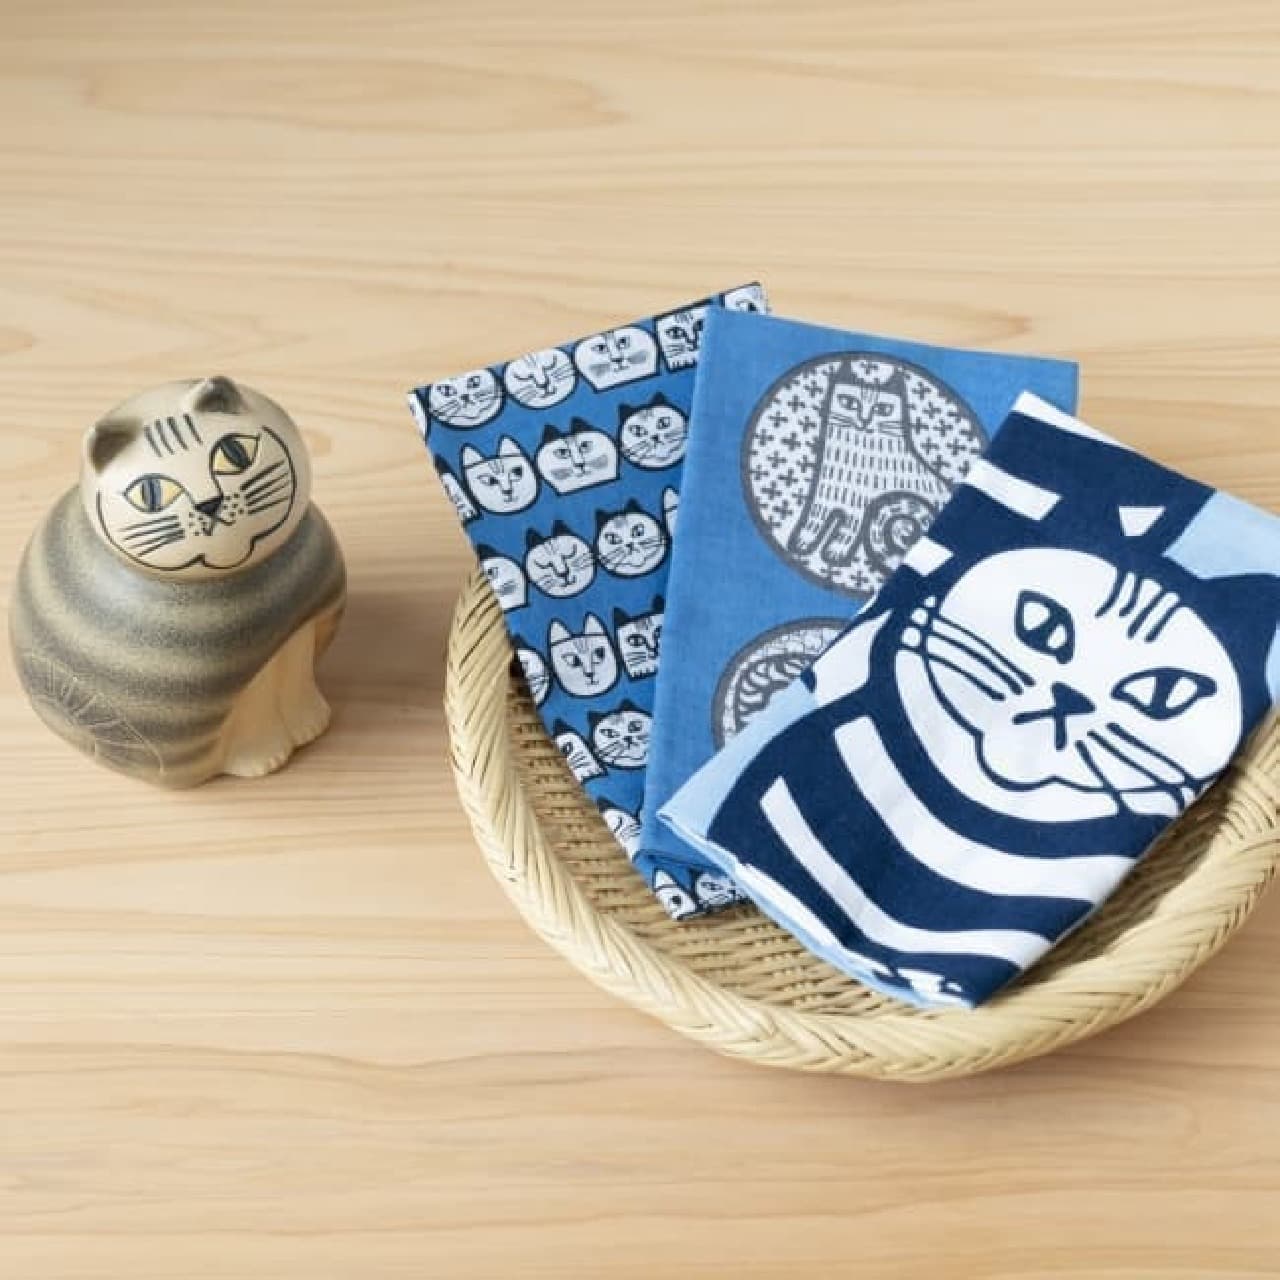 Collaboration with traditional crafts! Lisa Larson's bean dishes and towels are cute--Tonkachi store "JAPAN series" special feature